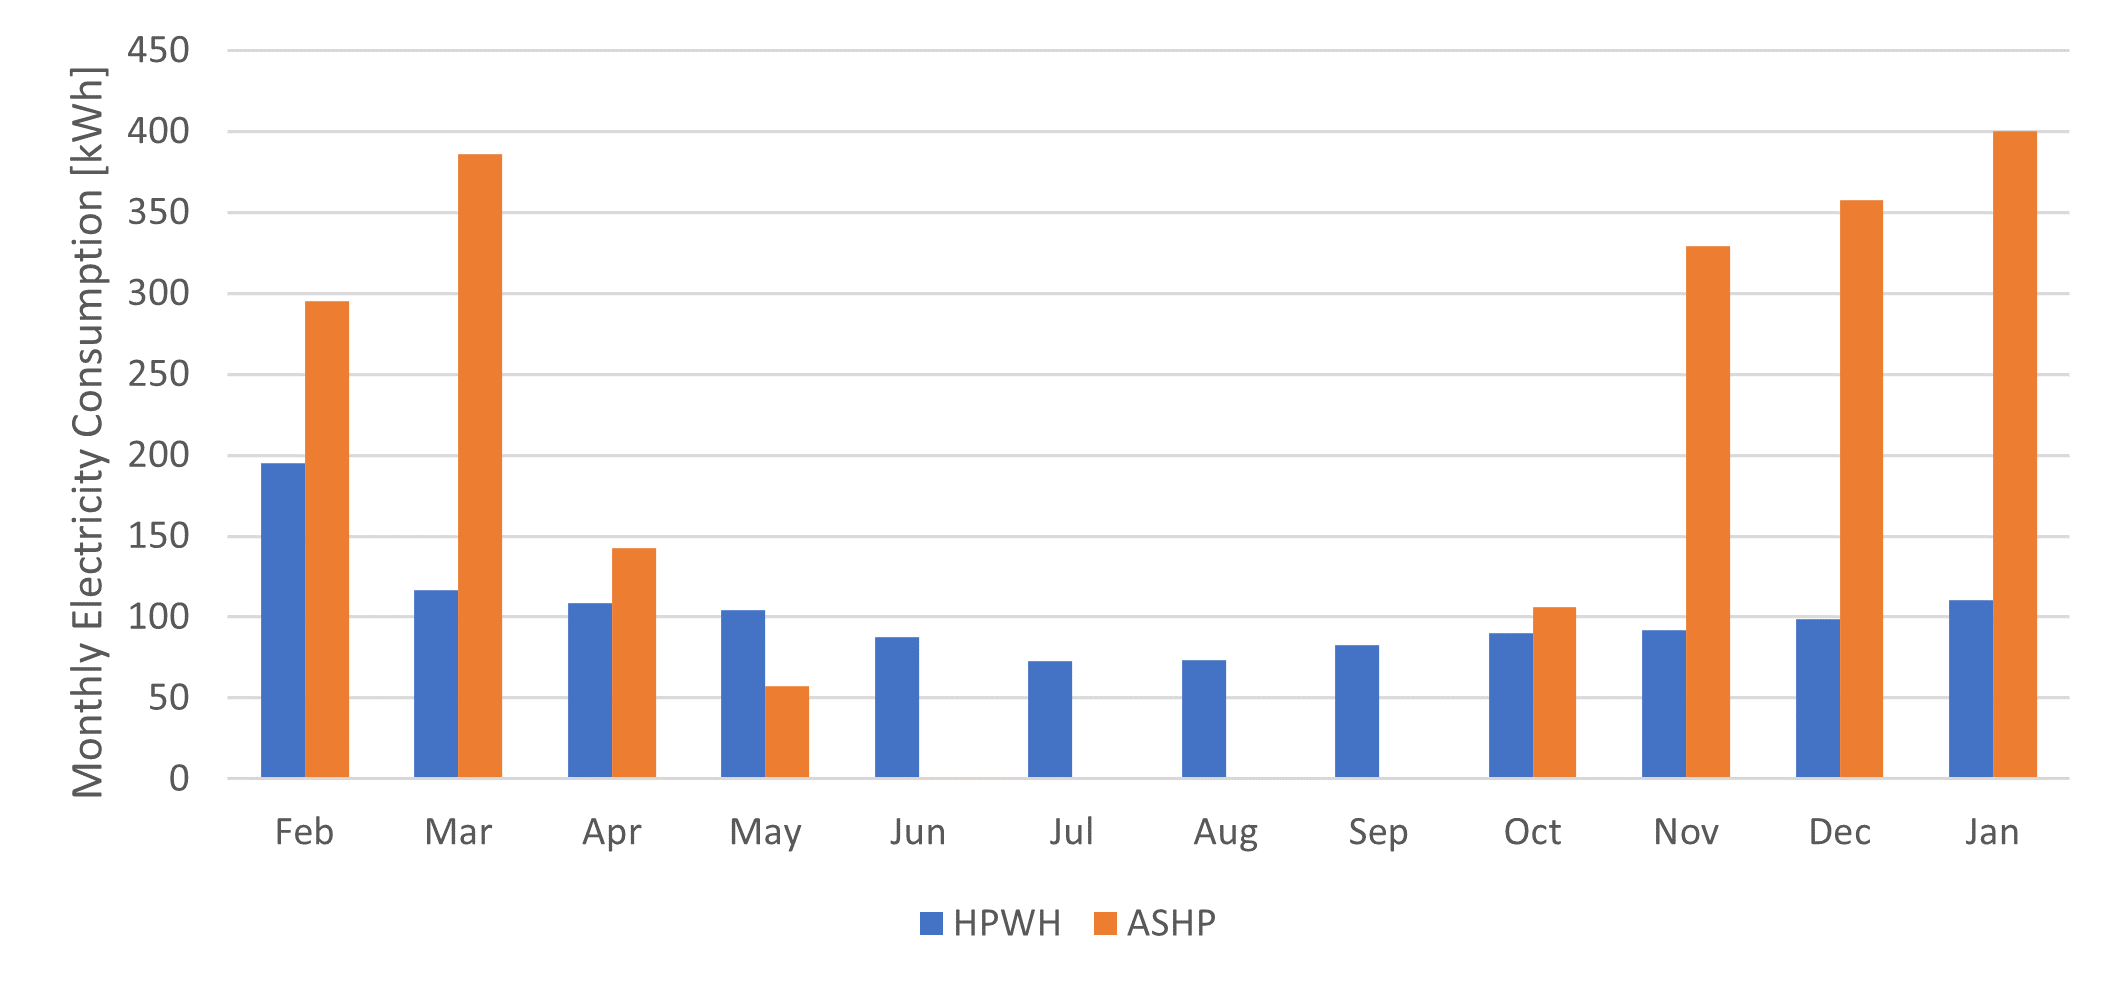 Plot showing monthly electricity consumption over the year for the ASHP heating and HPWH.